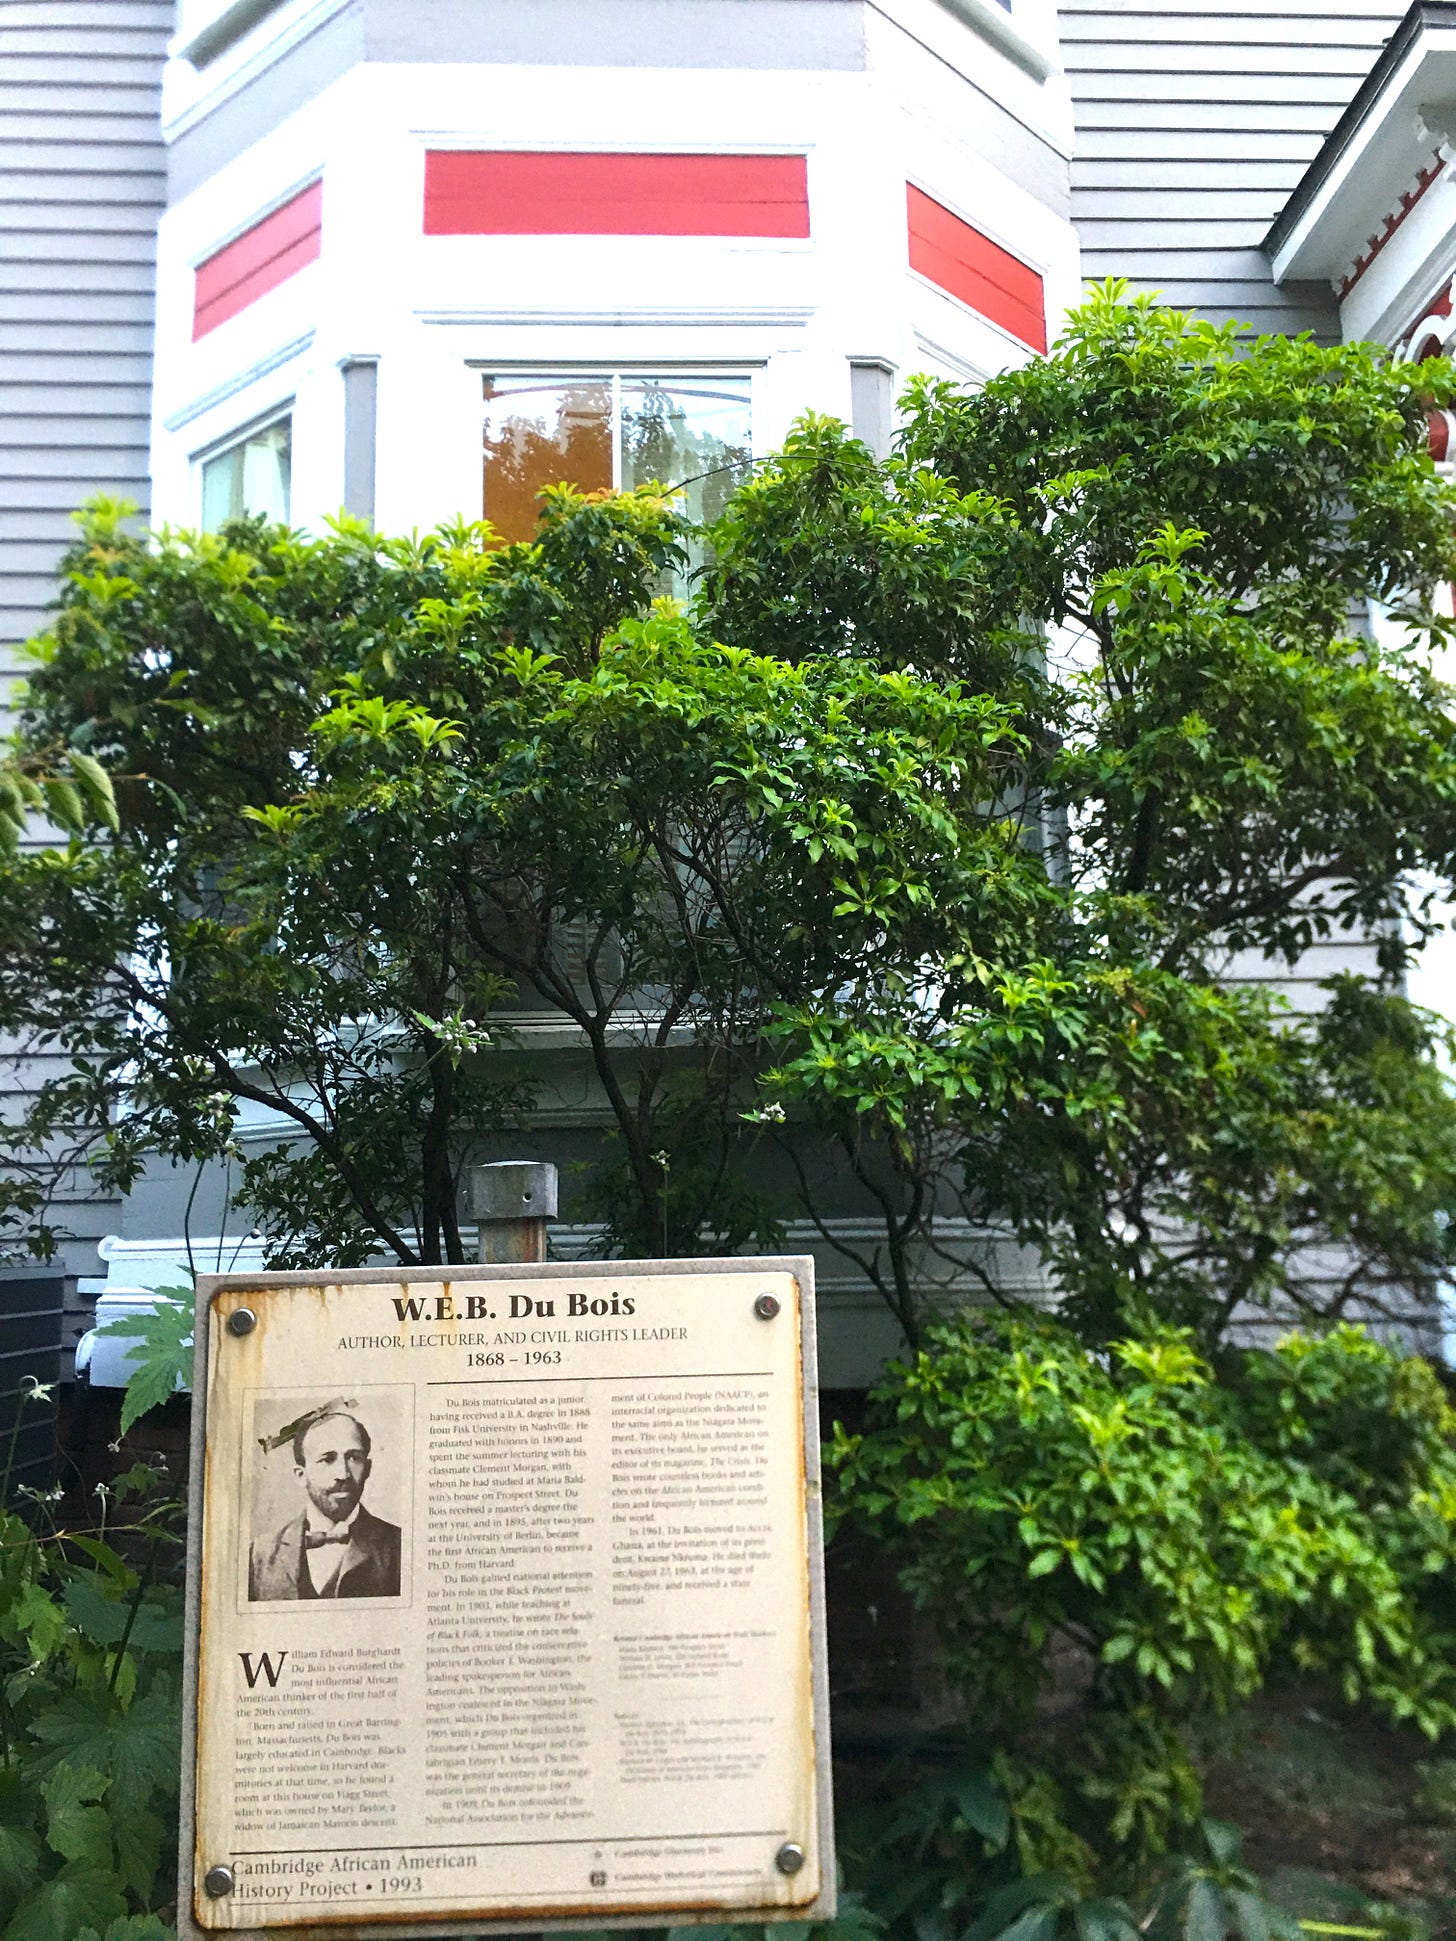 The exterior of the historic W.E.B. Du Bois house in Cambridge, with a commemorative sign backed by trees and shrubs.